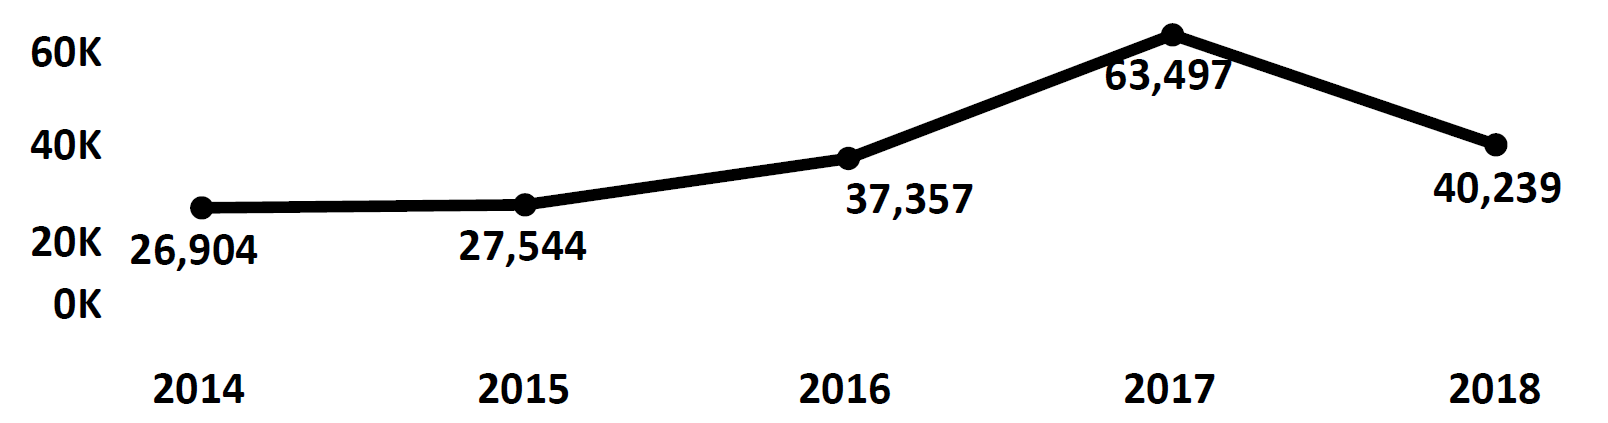 Graph of Do Not Call complaints recorded in Iowa from fiscal year 2014 to fiscal year 2018. In 2014 there were 26,904 complaints filed, which increased each year to peak at 63,497 in 2017. In 2018 there were 40,236 complaints filed, fewer than 2017.